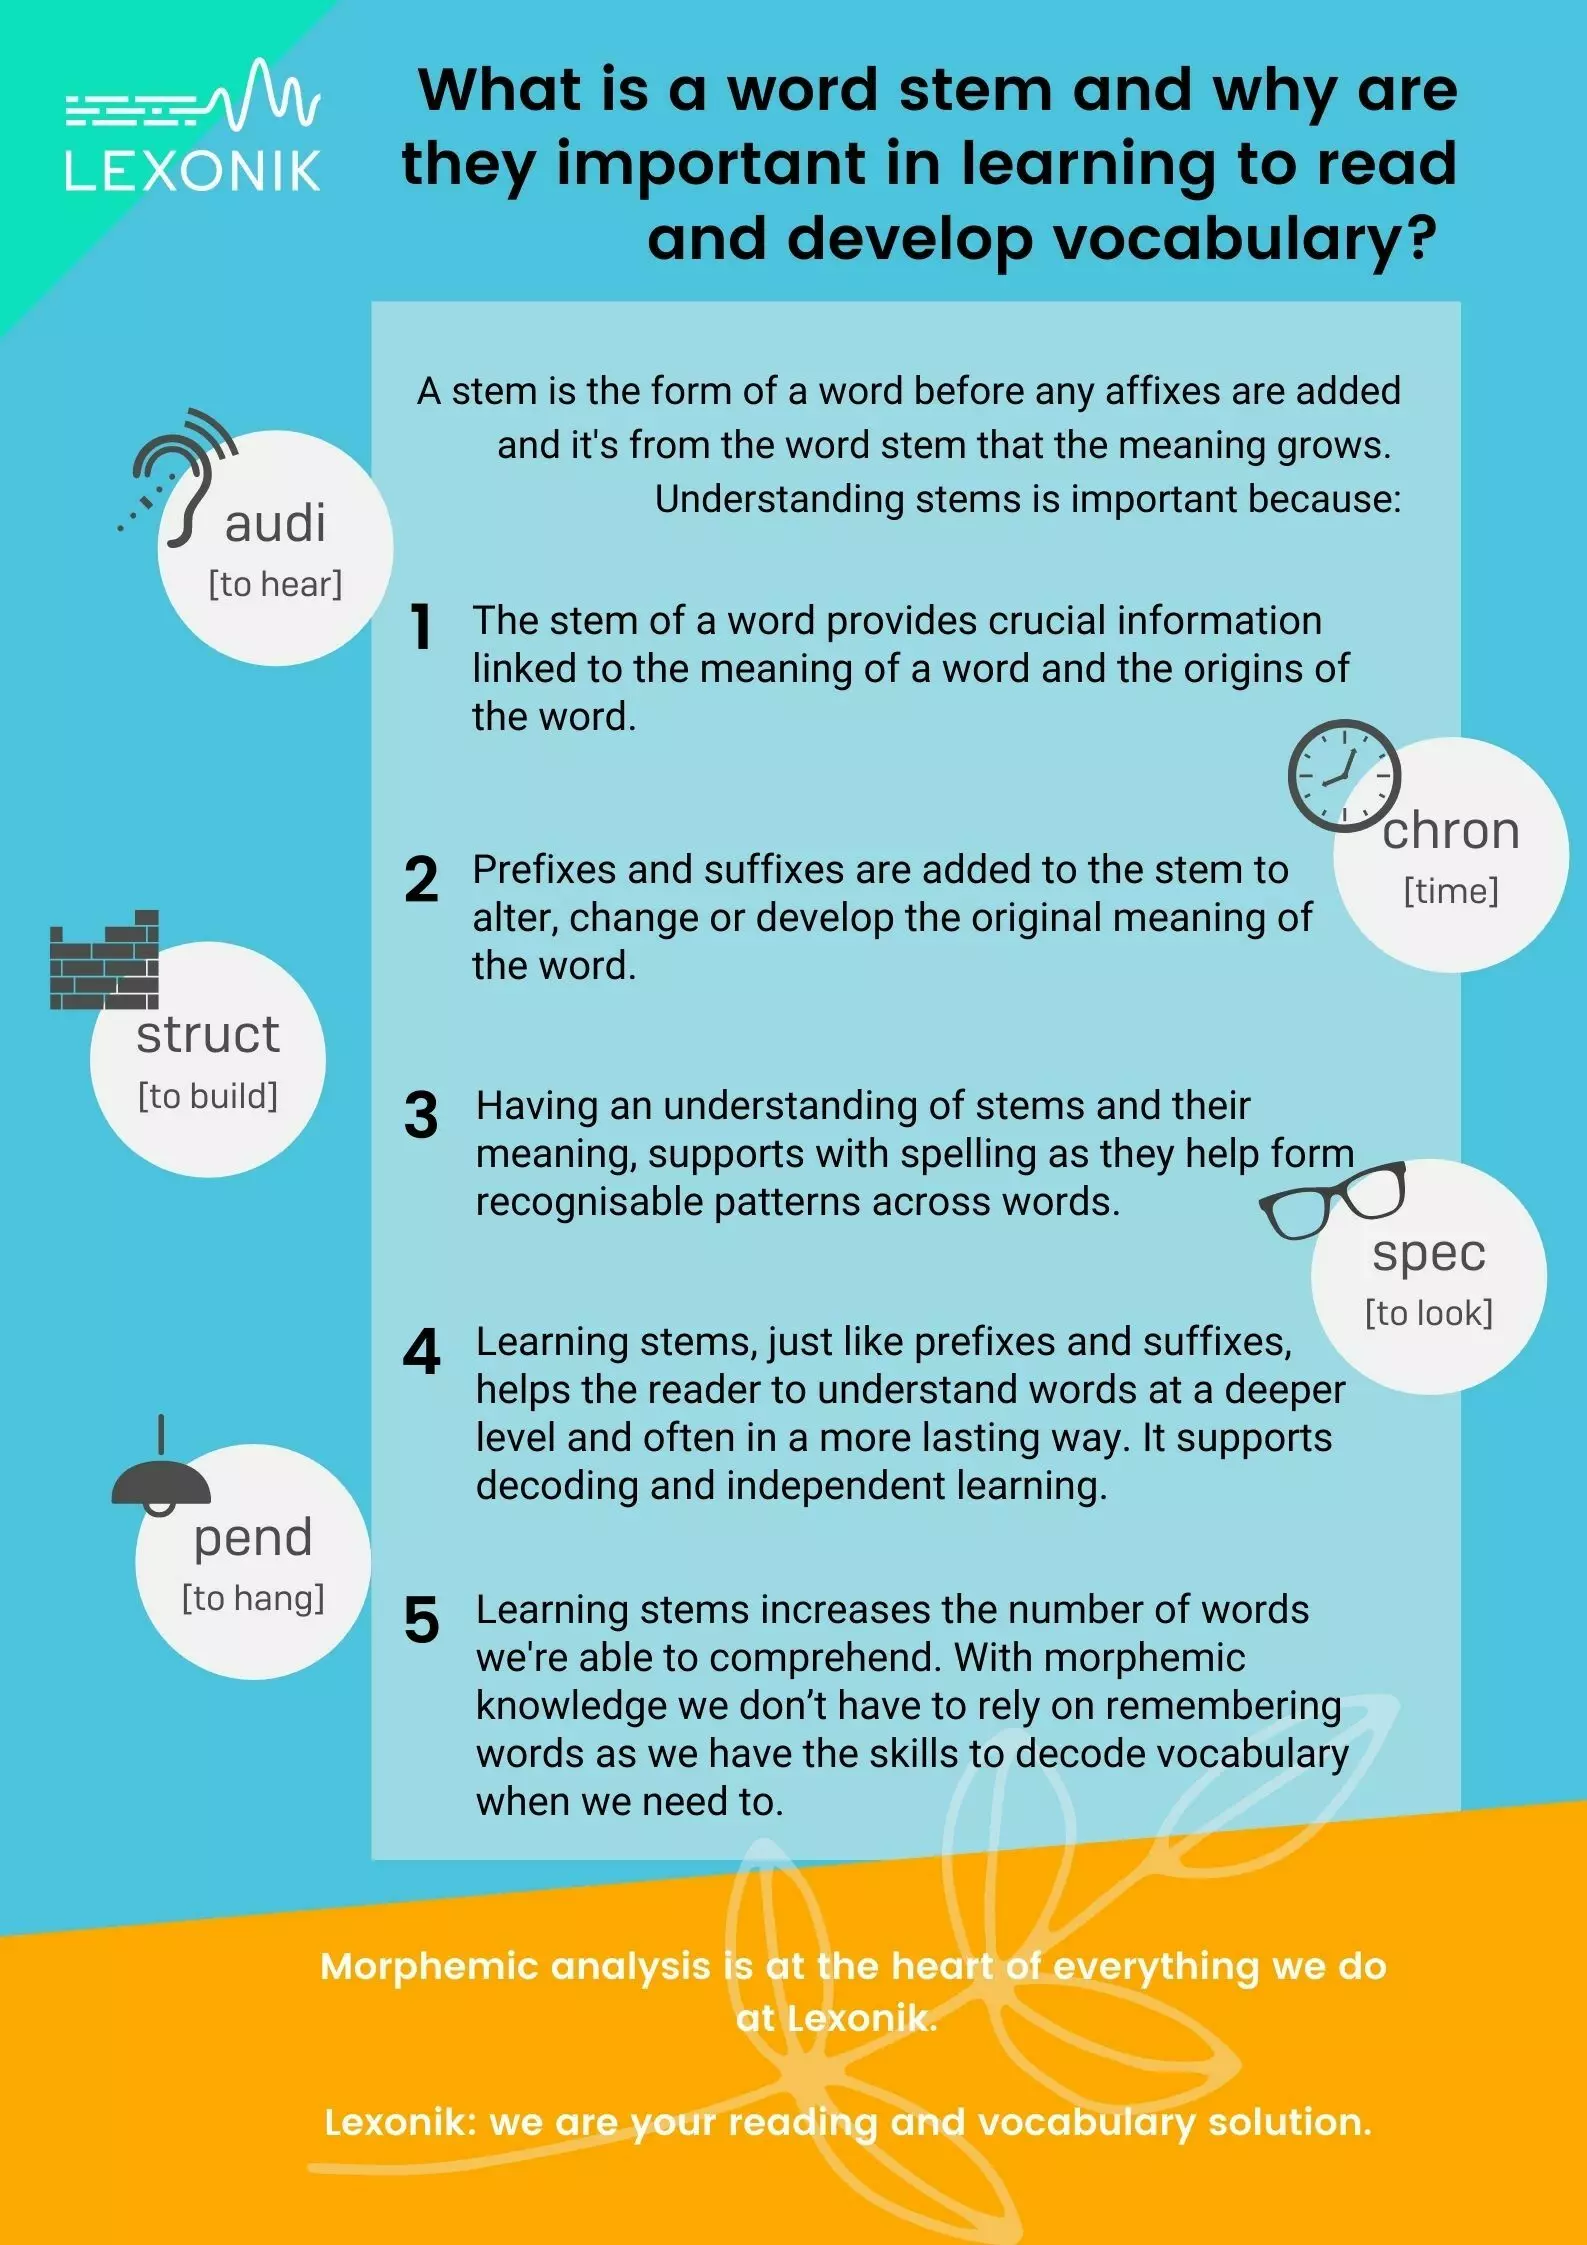 an infographic showing what a word stem is and why it is important